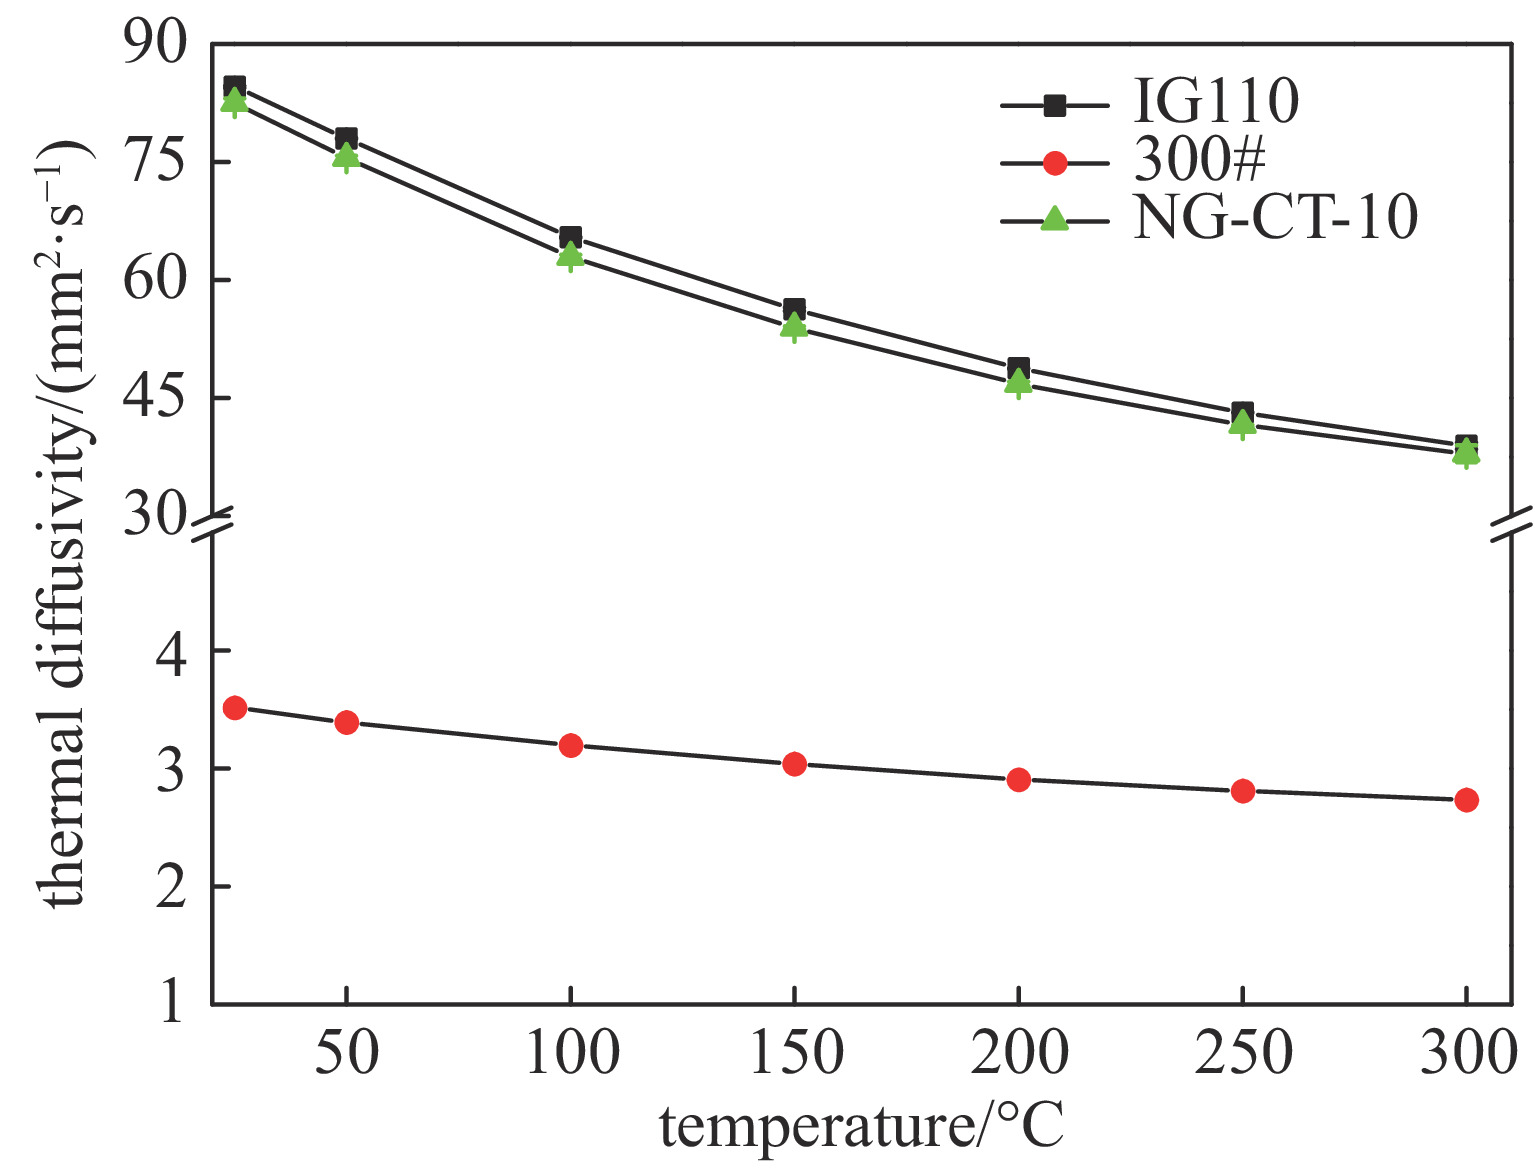 Thermal diffusivity of three types of graphite in the temperature range of measurement